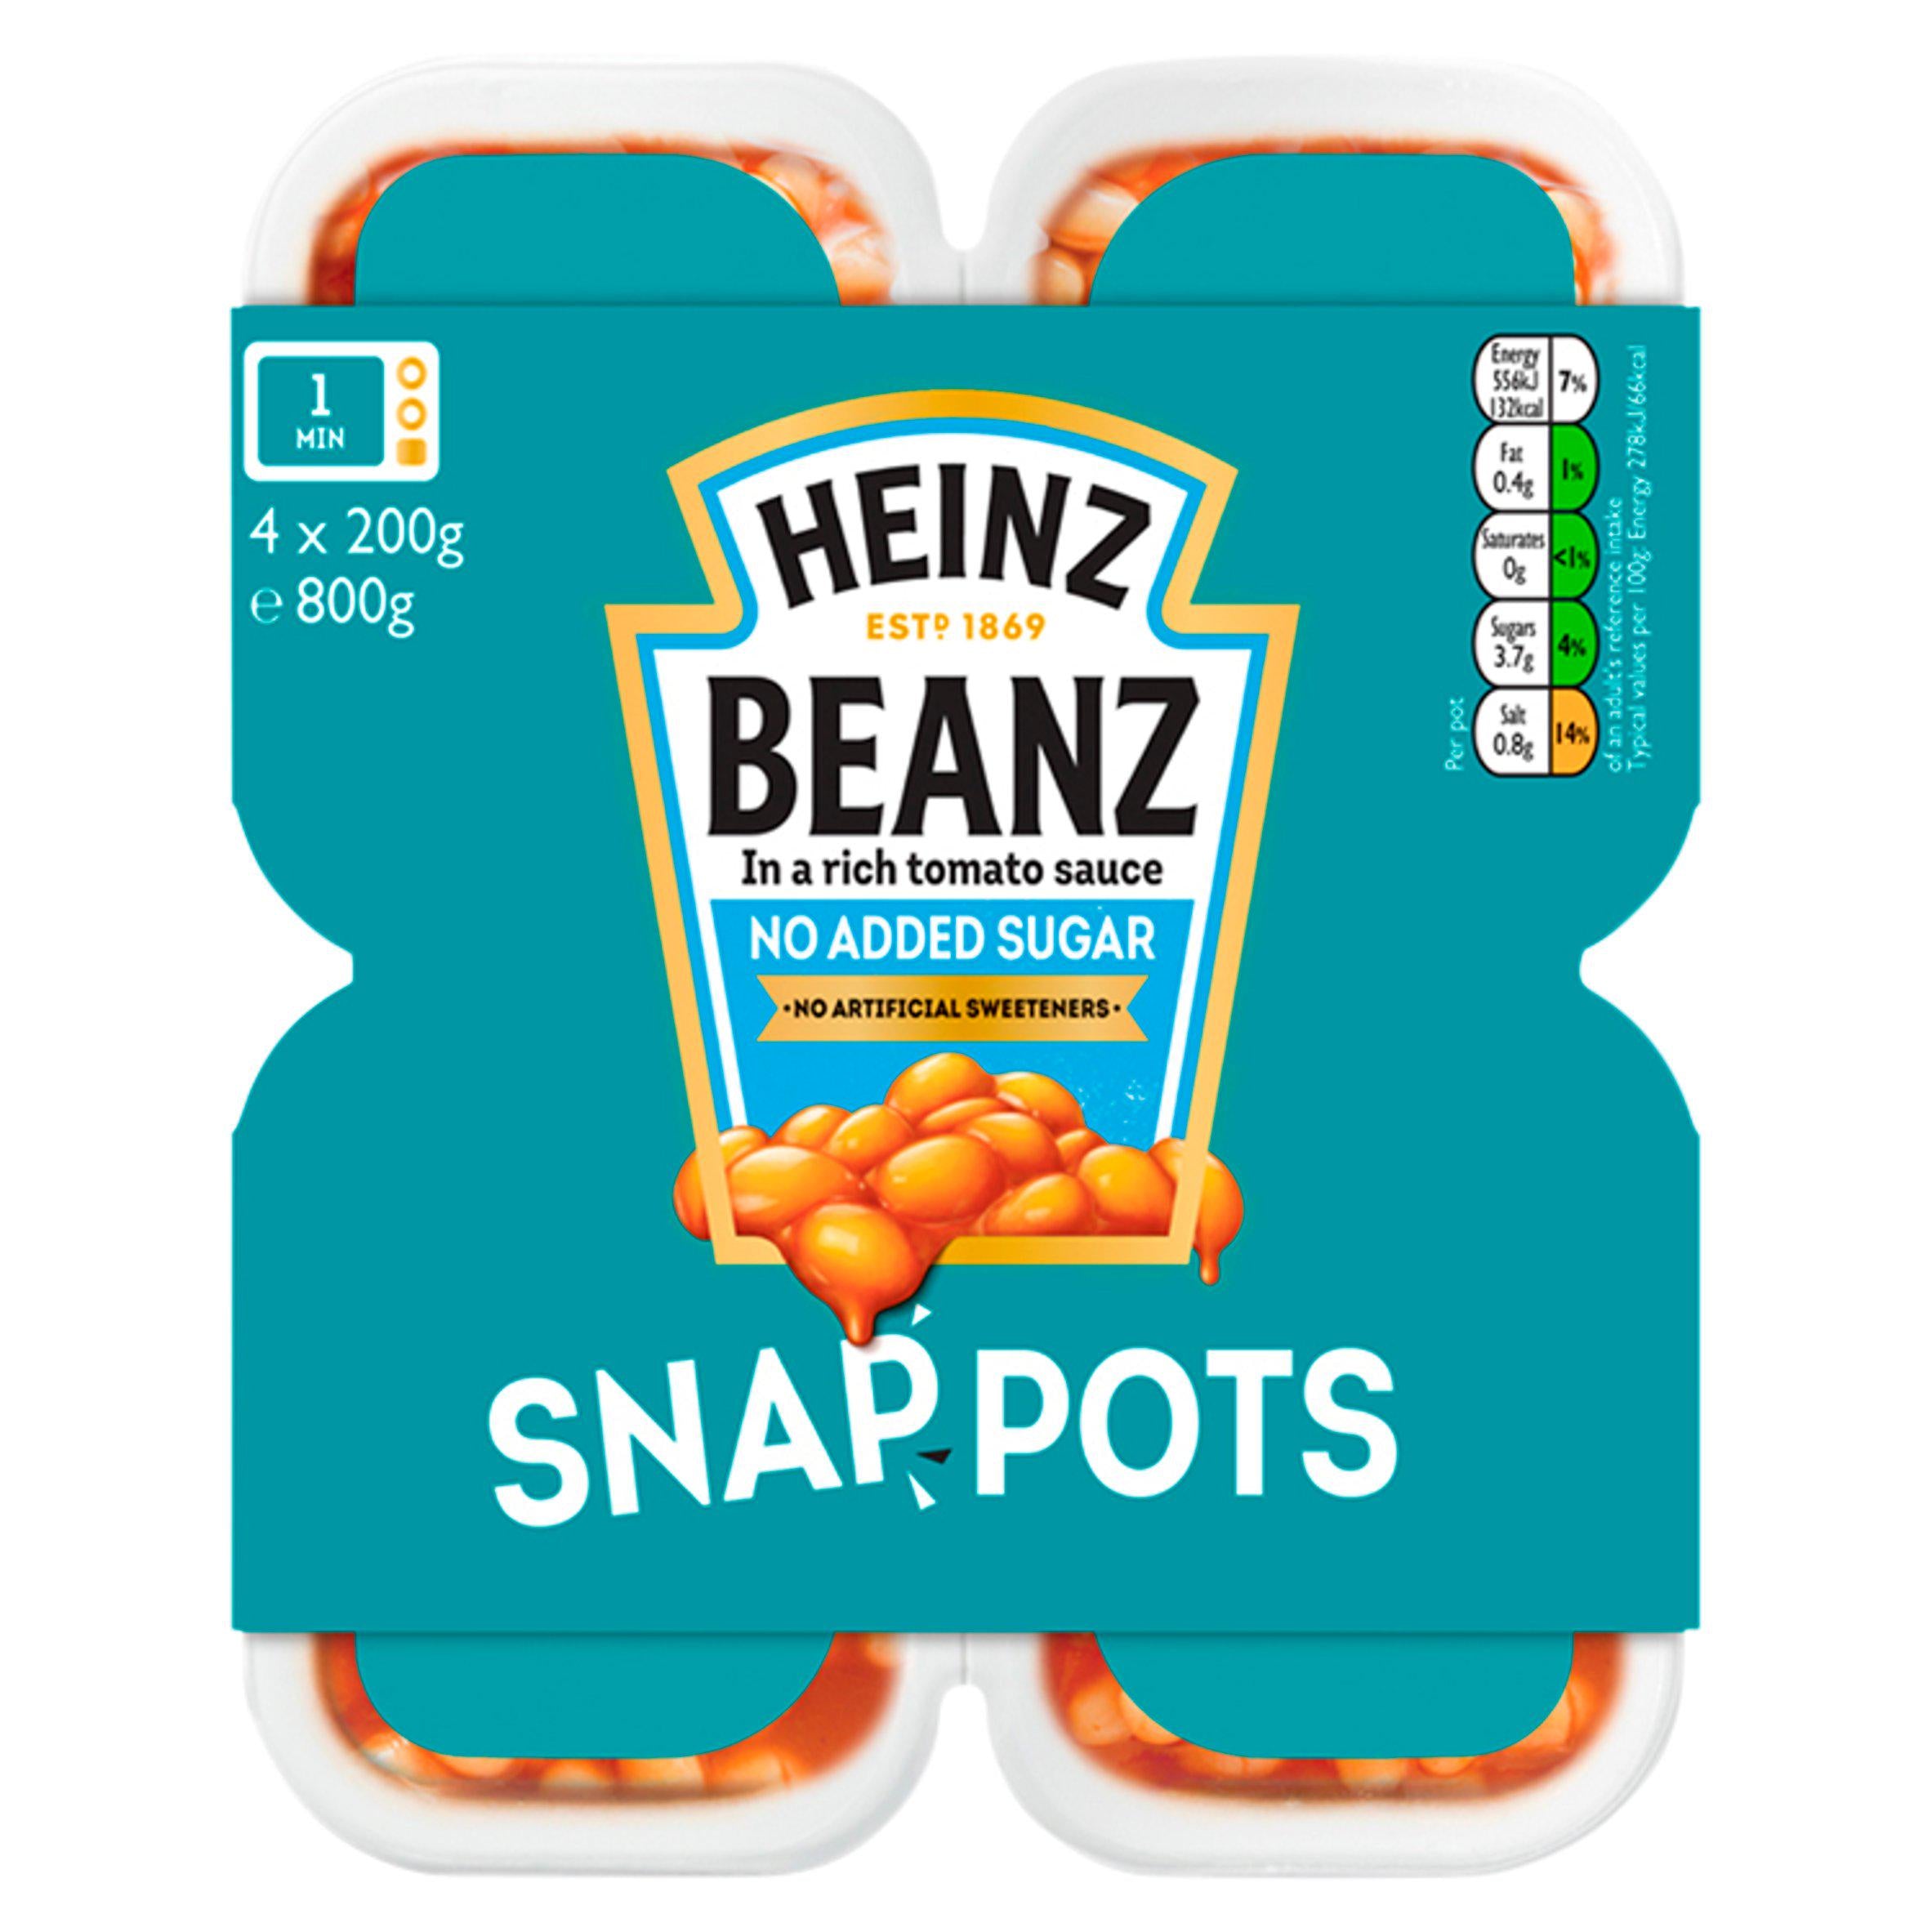 Heinz No Added Sugar Beans in a Rich Tomato Sauce 4x200g Baked beans & canned pasta Sainsburys   